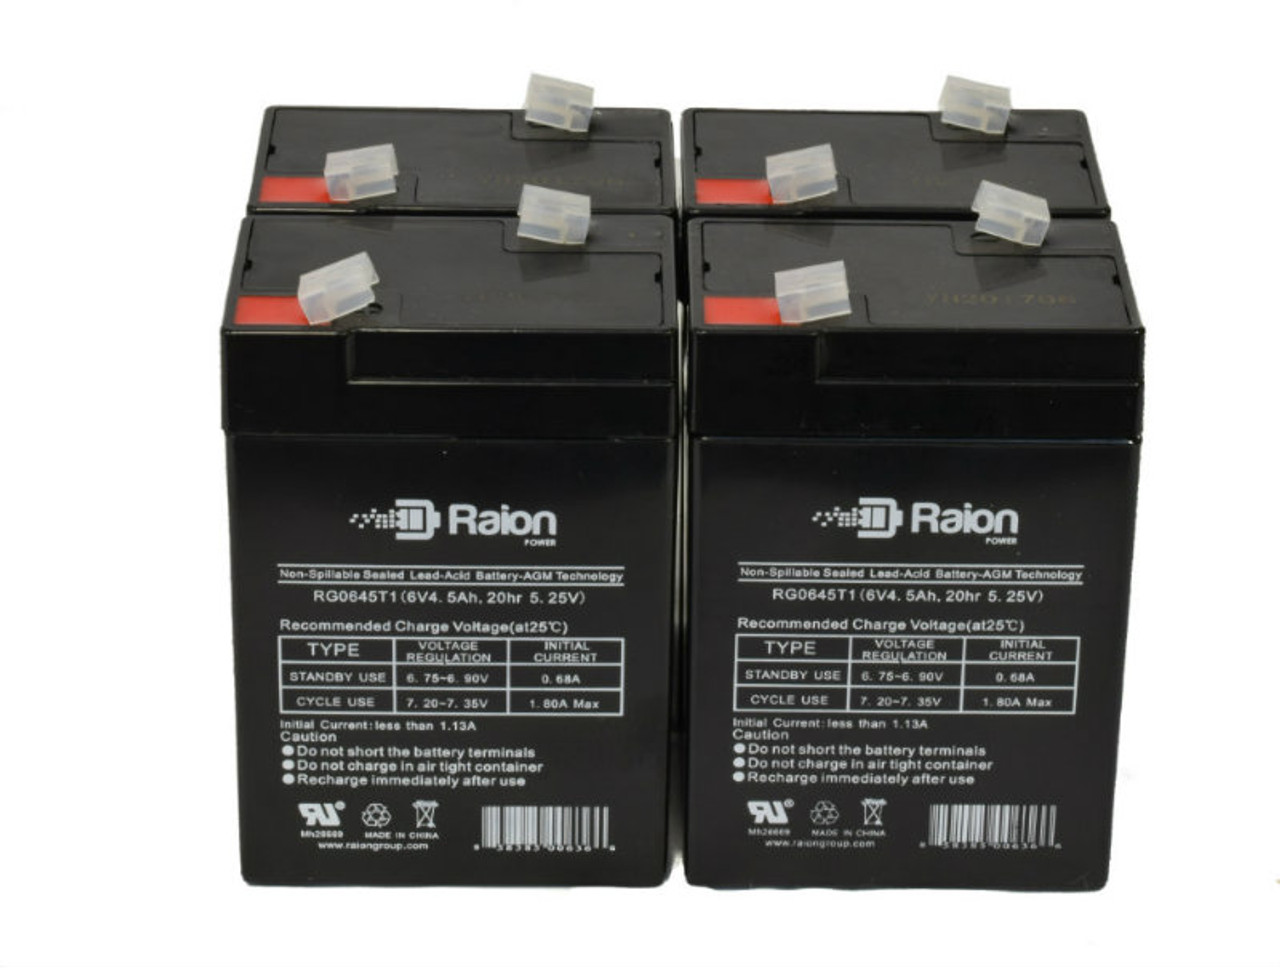 Raion Power 6V 4.5Ah Replacement Emergency Light Battery for Sentry Lite Inflater - 4 Pack